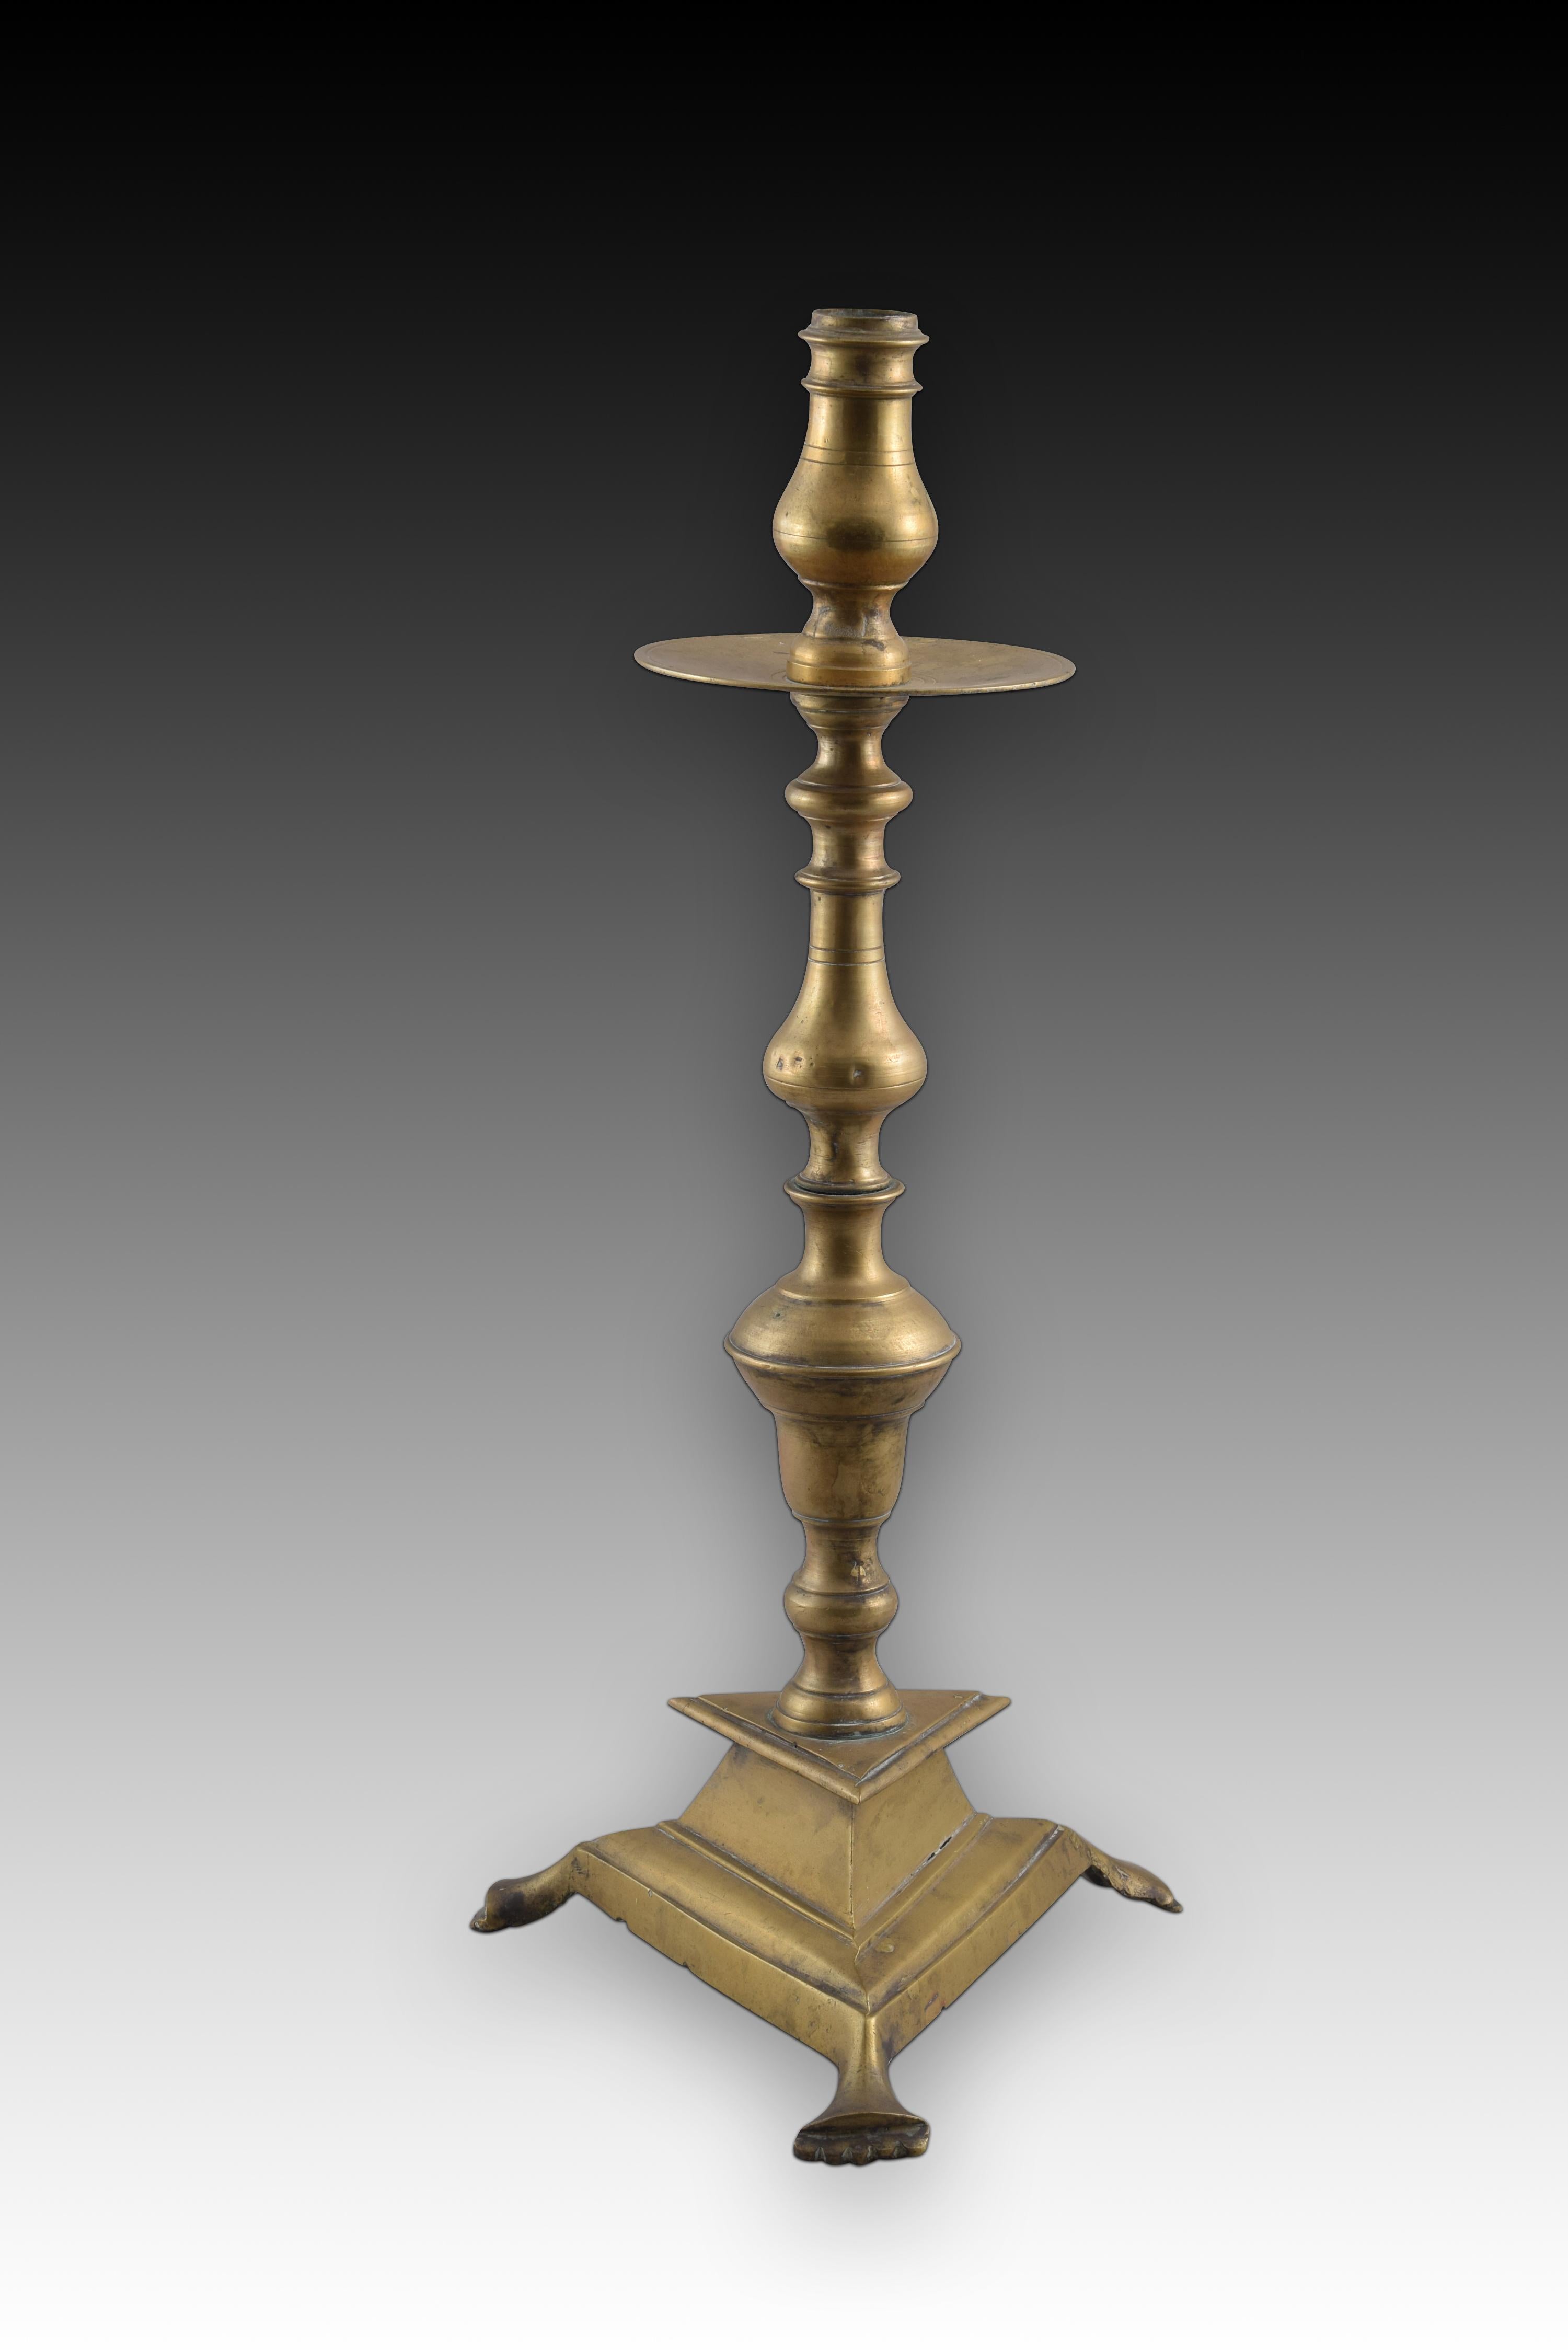 Candlestick with triangular base. Bronze. Spain, 18th century. 
Bronze candlestick with a triangular base raised on three legs and enhanced with moldings, a balustraded shaft with discs of different diameters and a similarly decorated top, right in